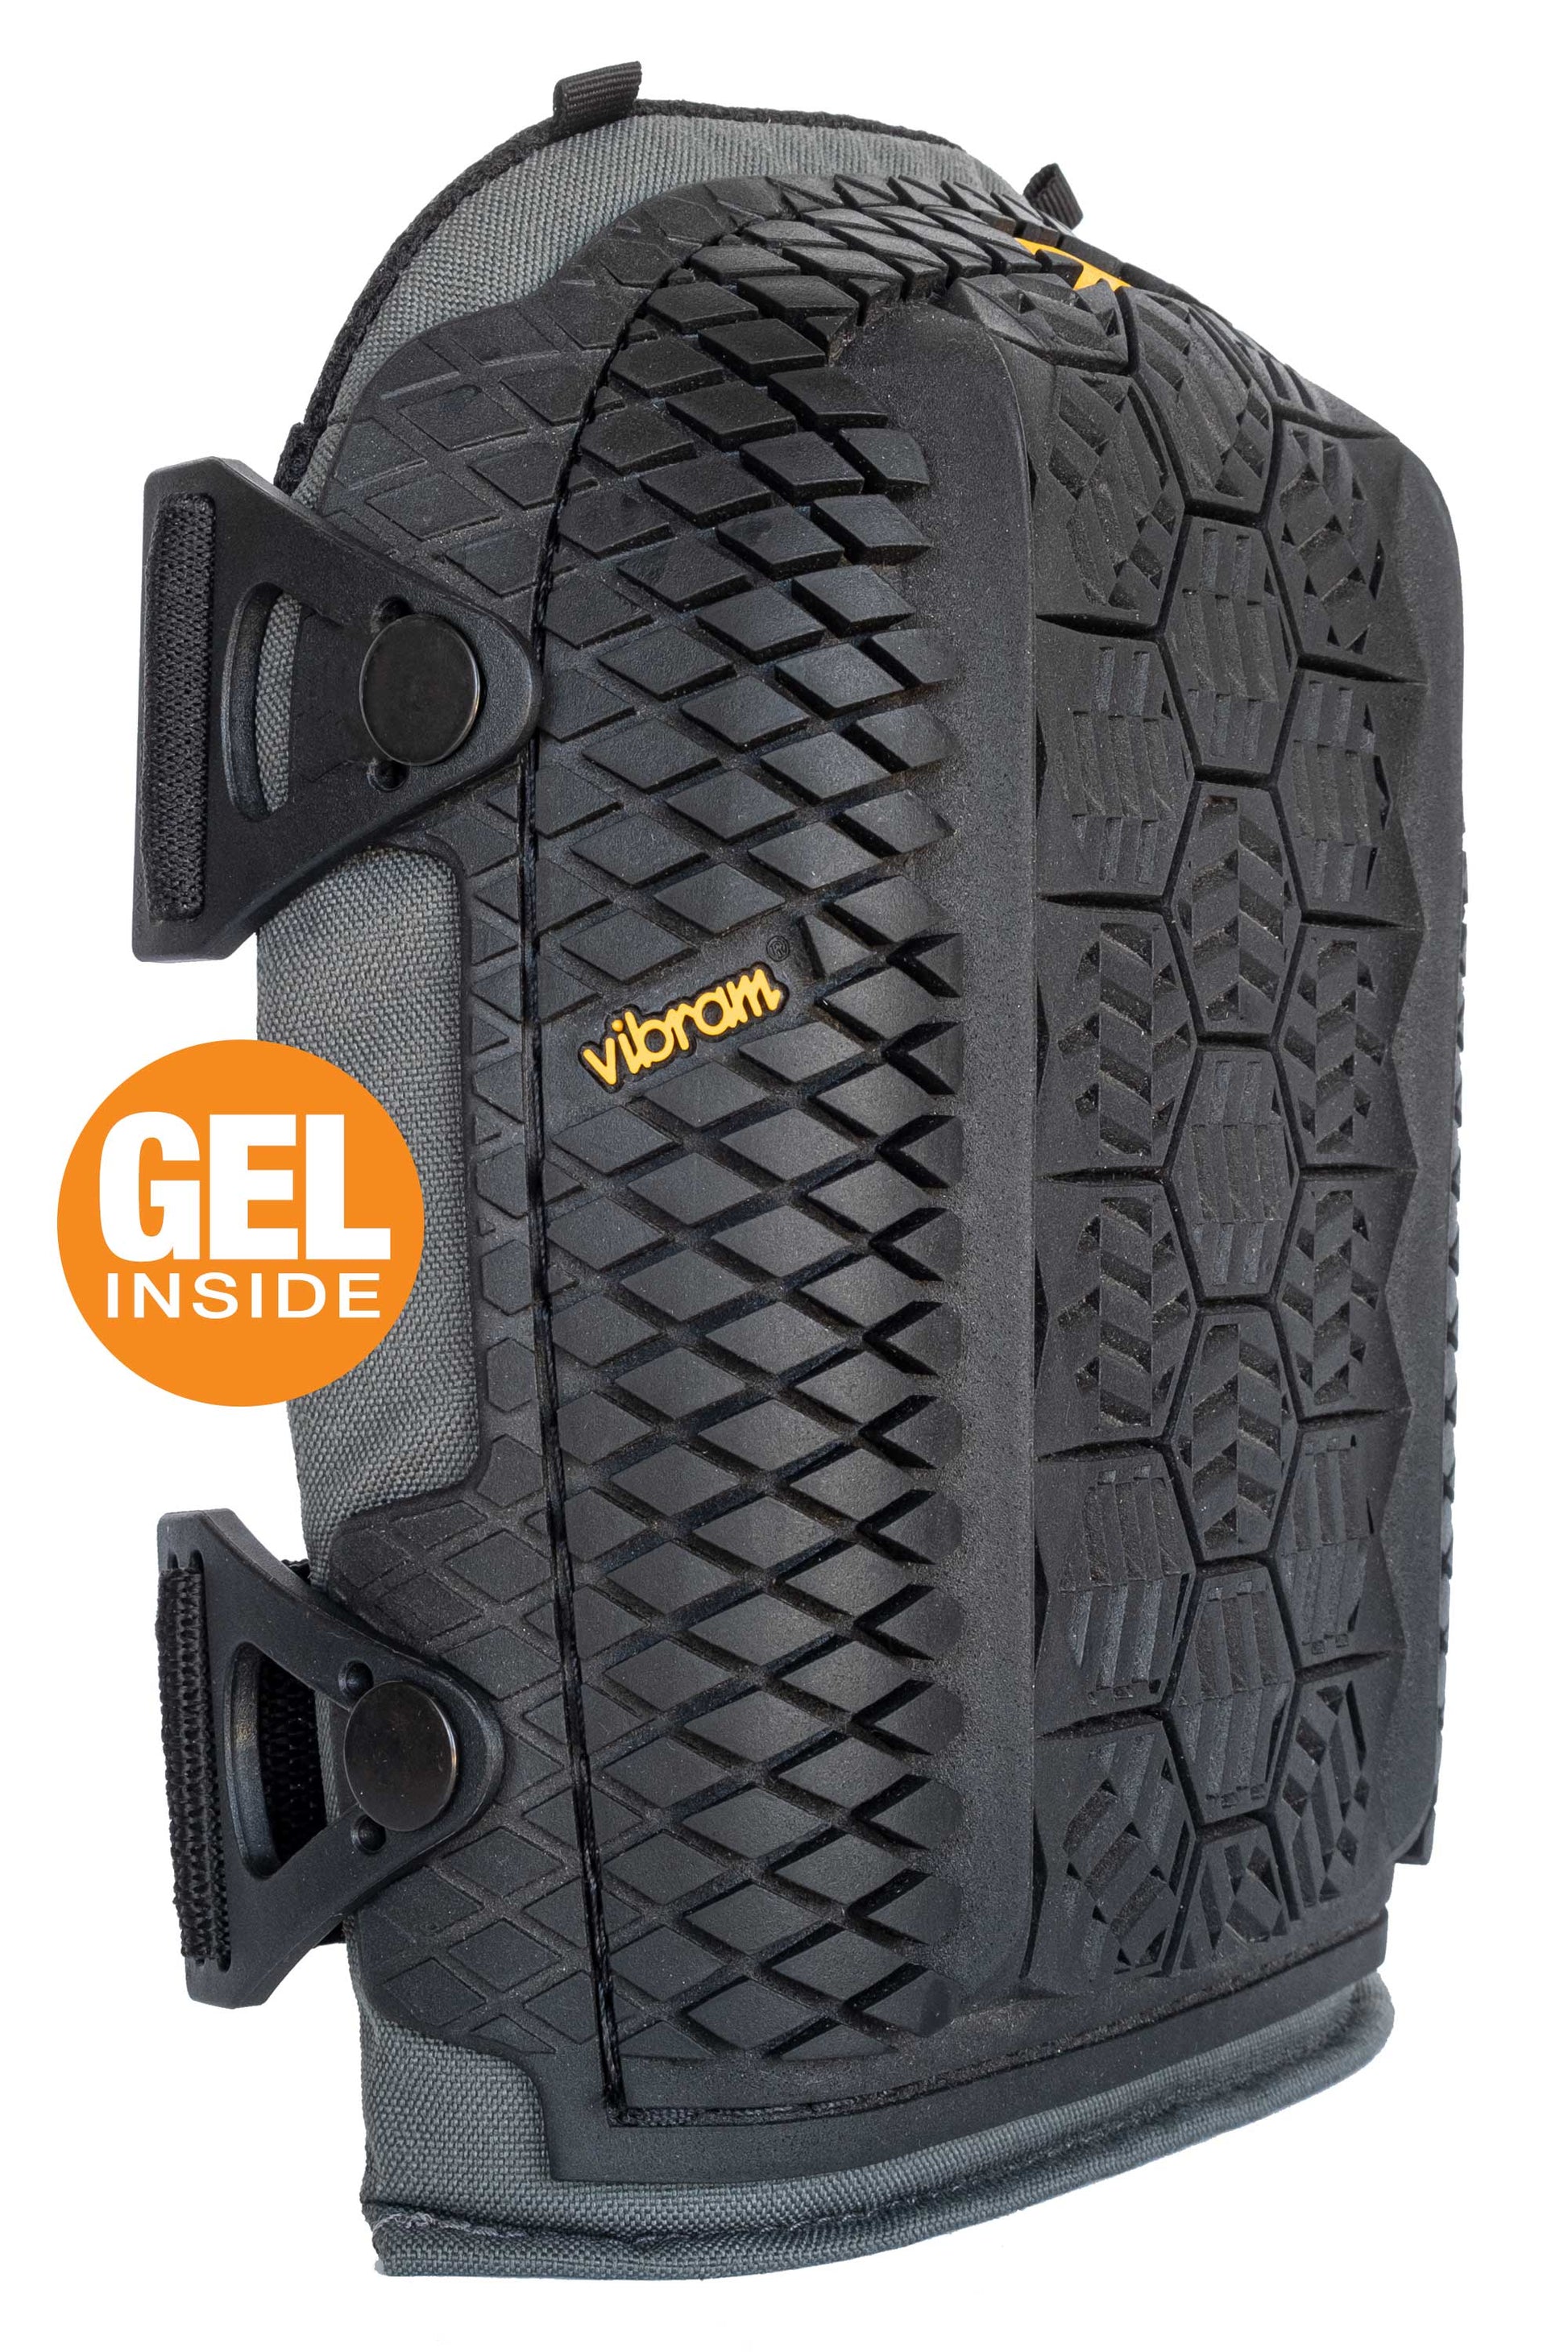 STABILIZER KNEE PAD with VIBRAM® RUBBER CAP KEEPS YOU LEVEL ON THE ROOF AND ANY UNEVEN WORK SURFACE